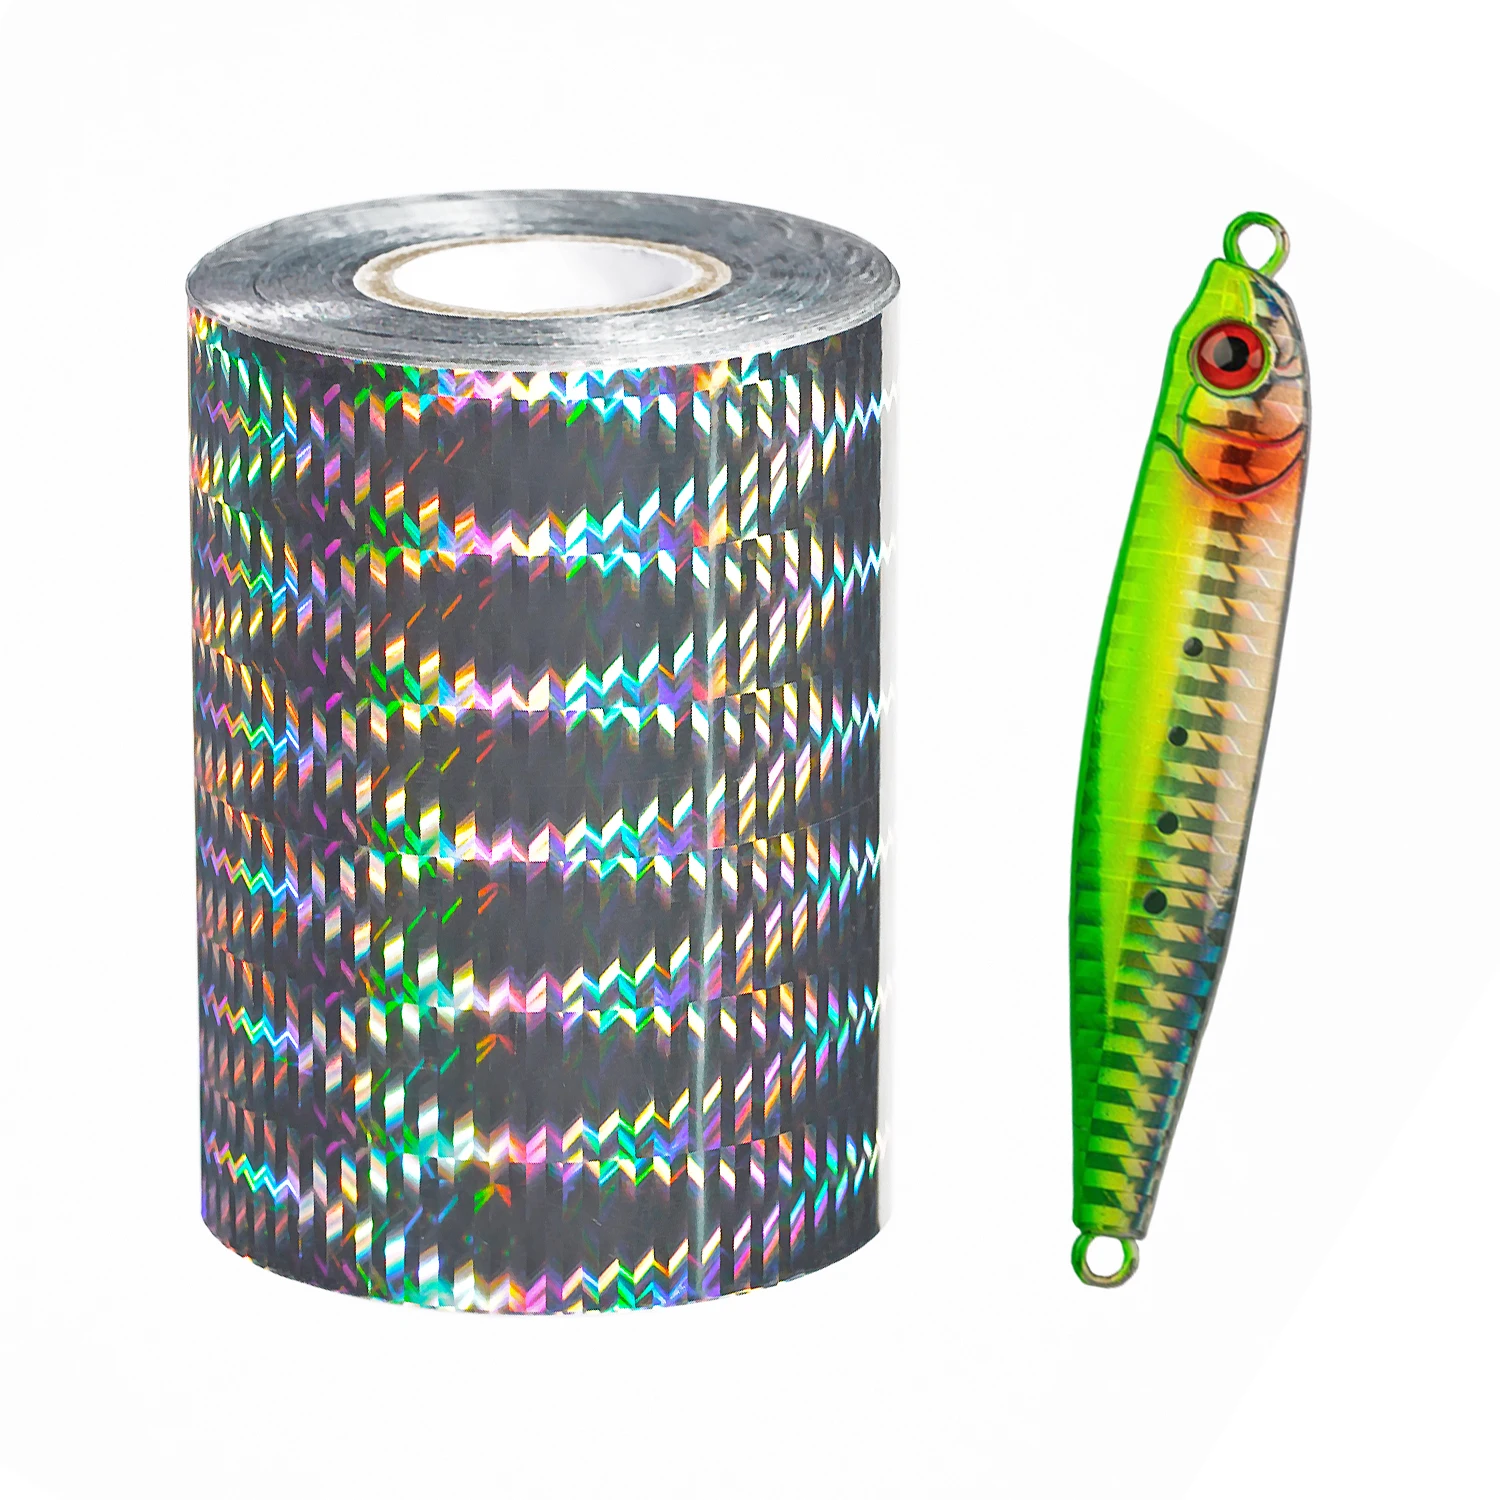 https://ae01.alicdn.com/kf/U2c9ba9489ef44d43b3ce34f3d0f2374cH/Free-Shipping-Colorful-Hot-Stamping-Foil-For-Fishing-Lure-Jigs-Baits-Spoon-Paper-8cm-3-14.jpg